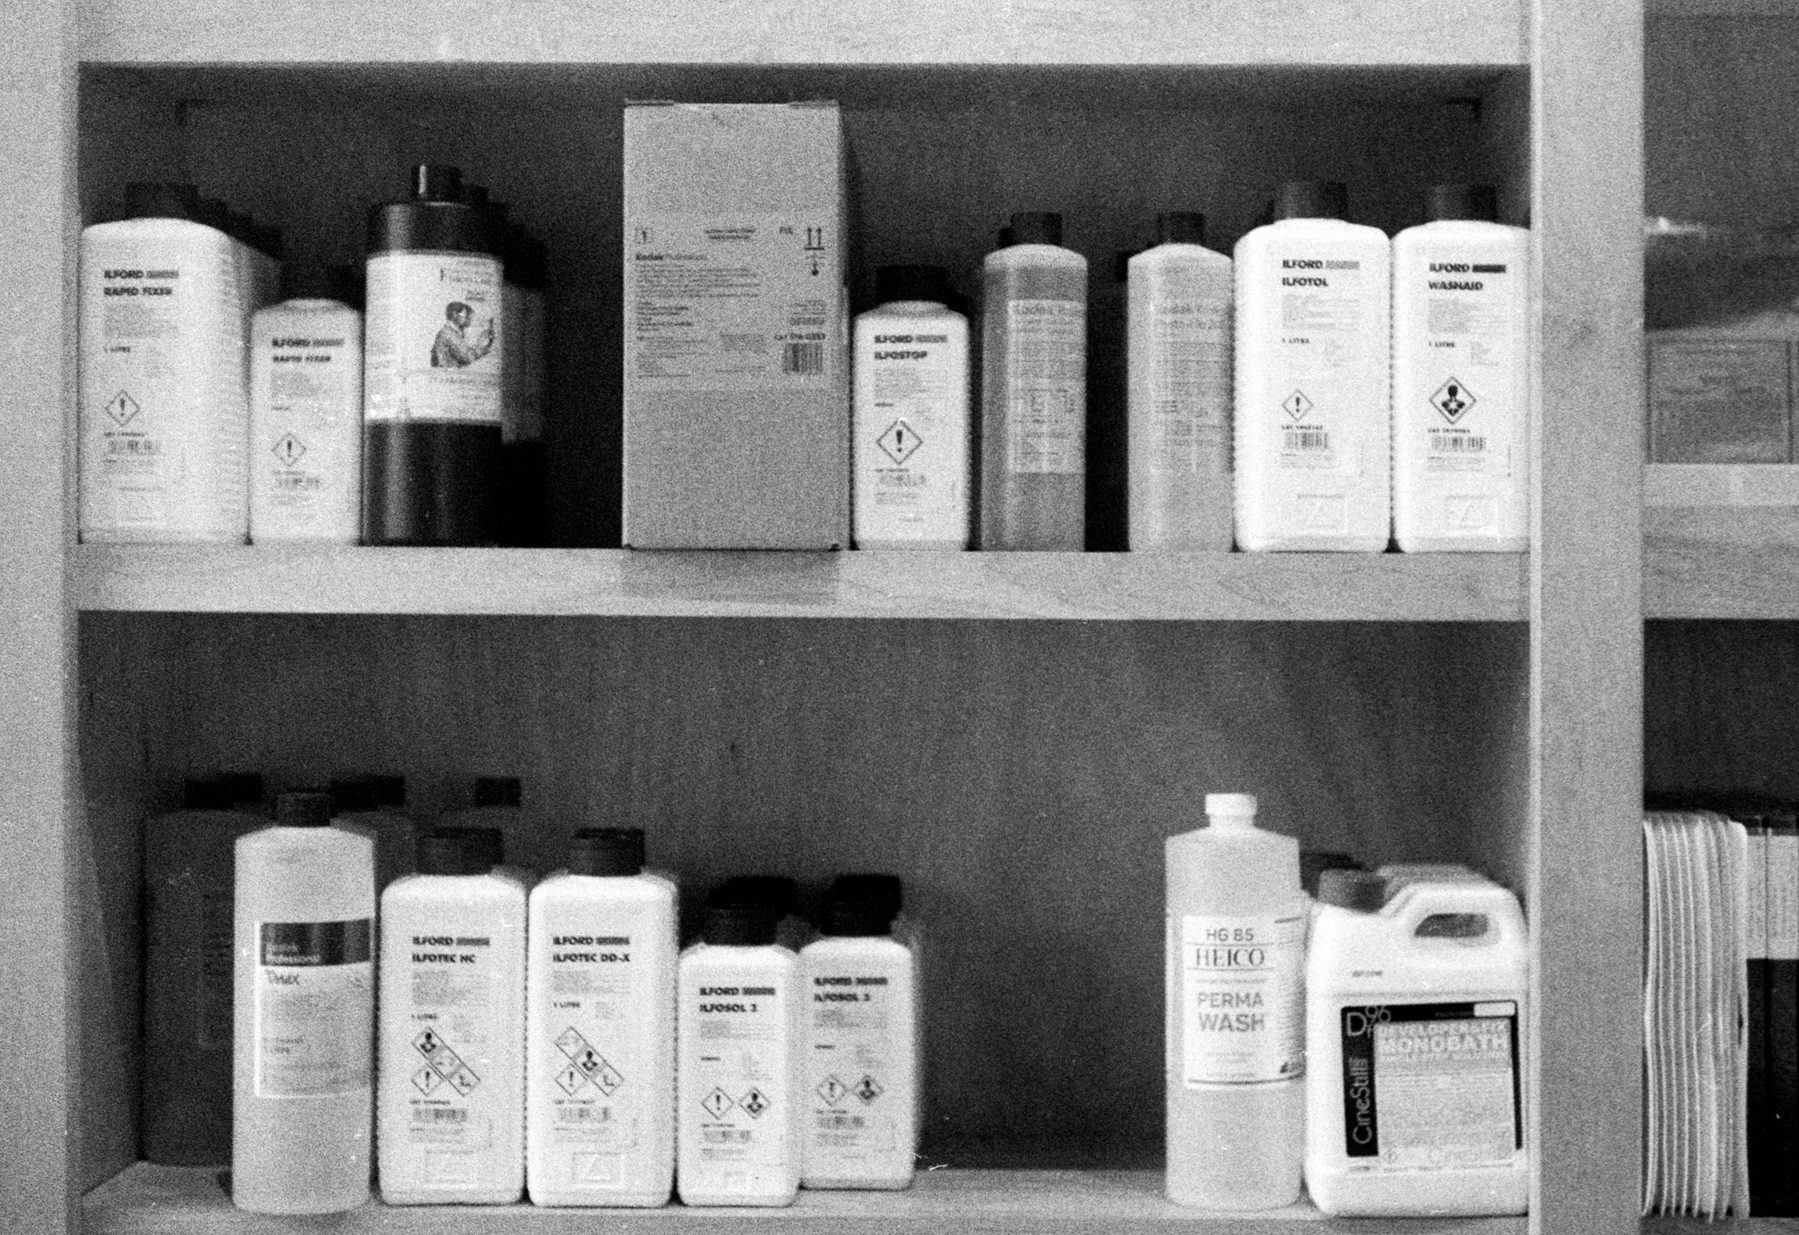 a scan of a black and white photo showing some film development chemicals on a shelf in a photography store, brands include Ilford and Kodak